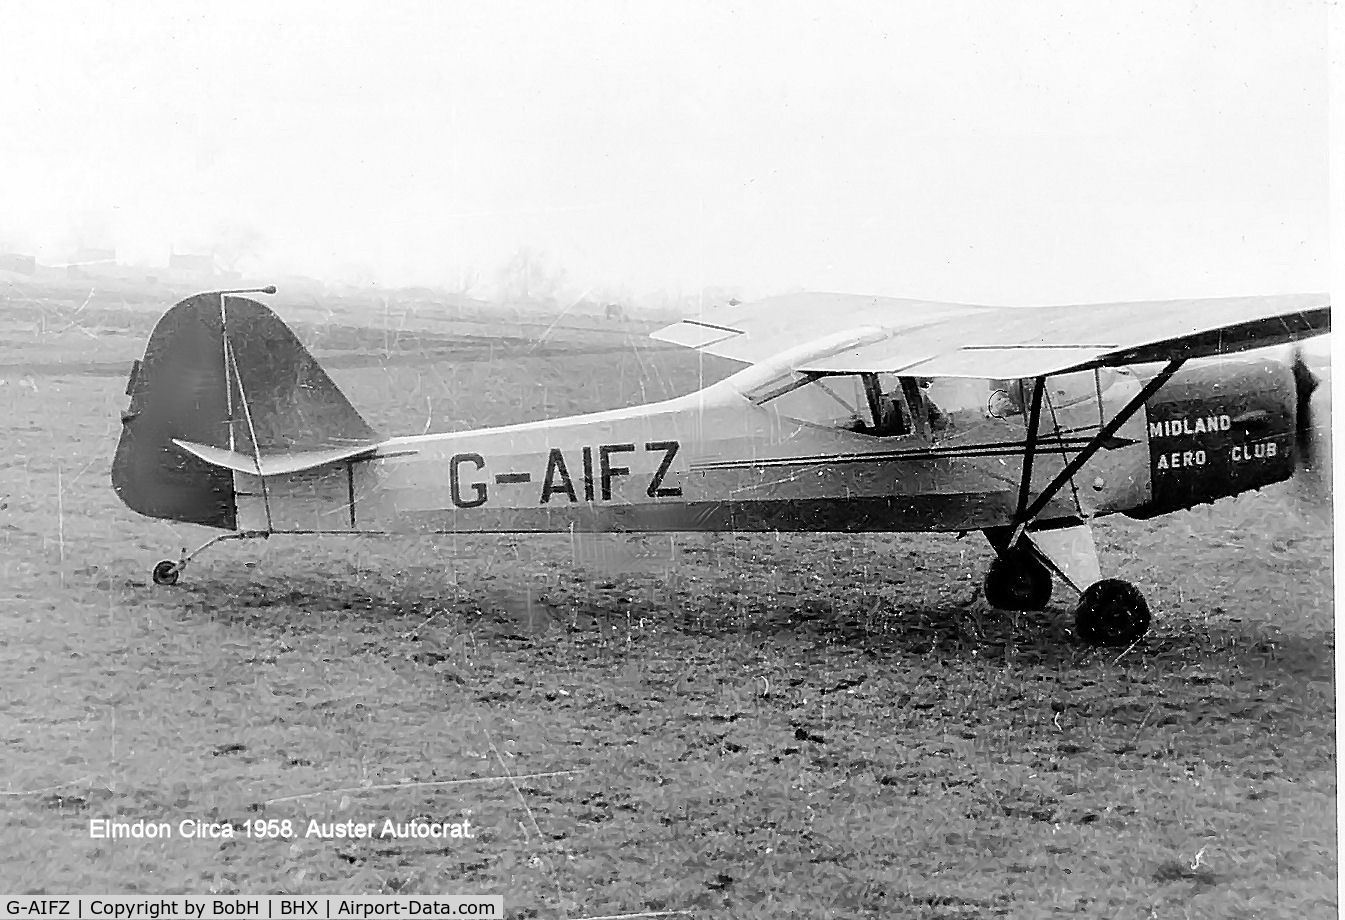 G-AIFZ, 1946 Auster J-1N Alpha C/N 2182, G-AIFZ, shown here at Elmdon (Birmingham) circa 1958 was described by the Midland Aero Club at that time as an Autocrat rather than an Alpha. The modern picture describes it as an Alpha and it is possible to convert the airframe thus. Any ideas?